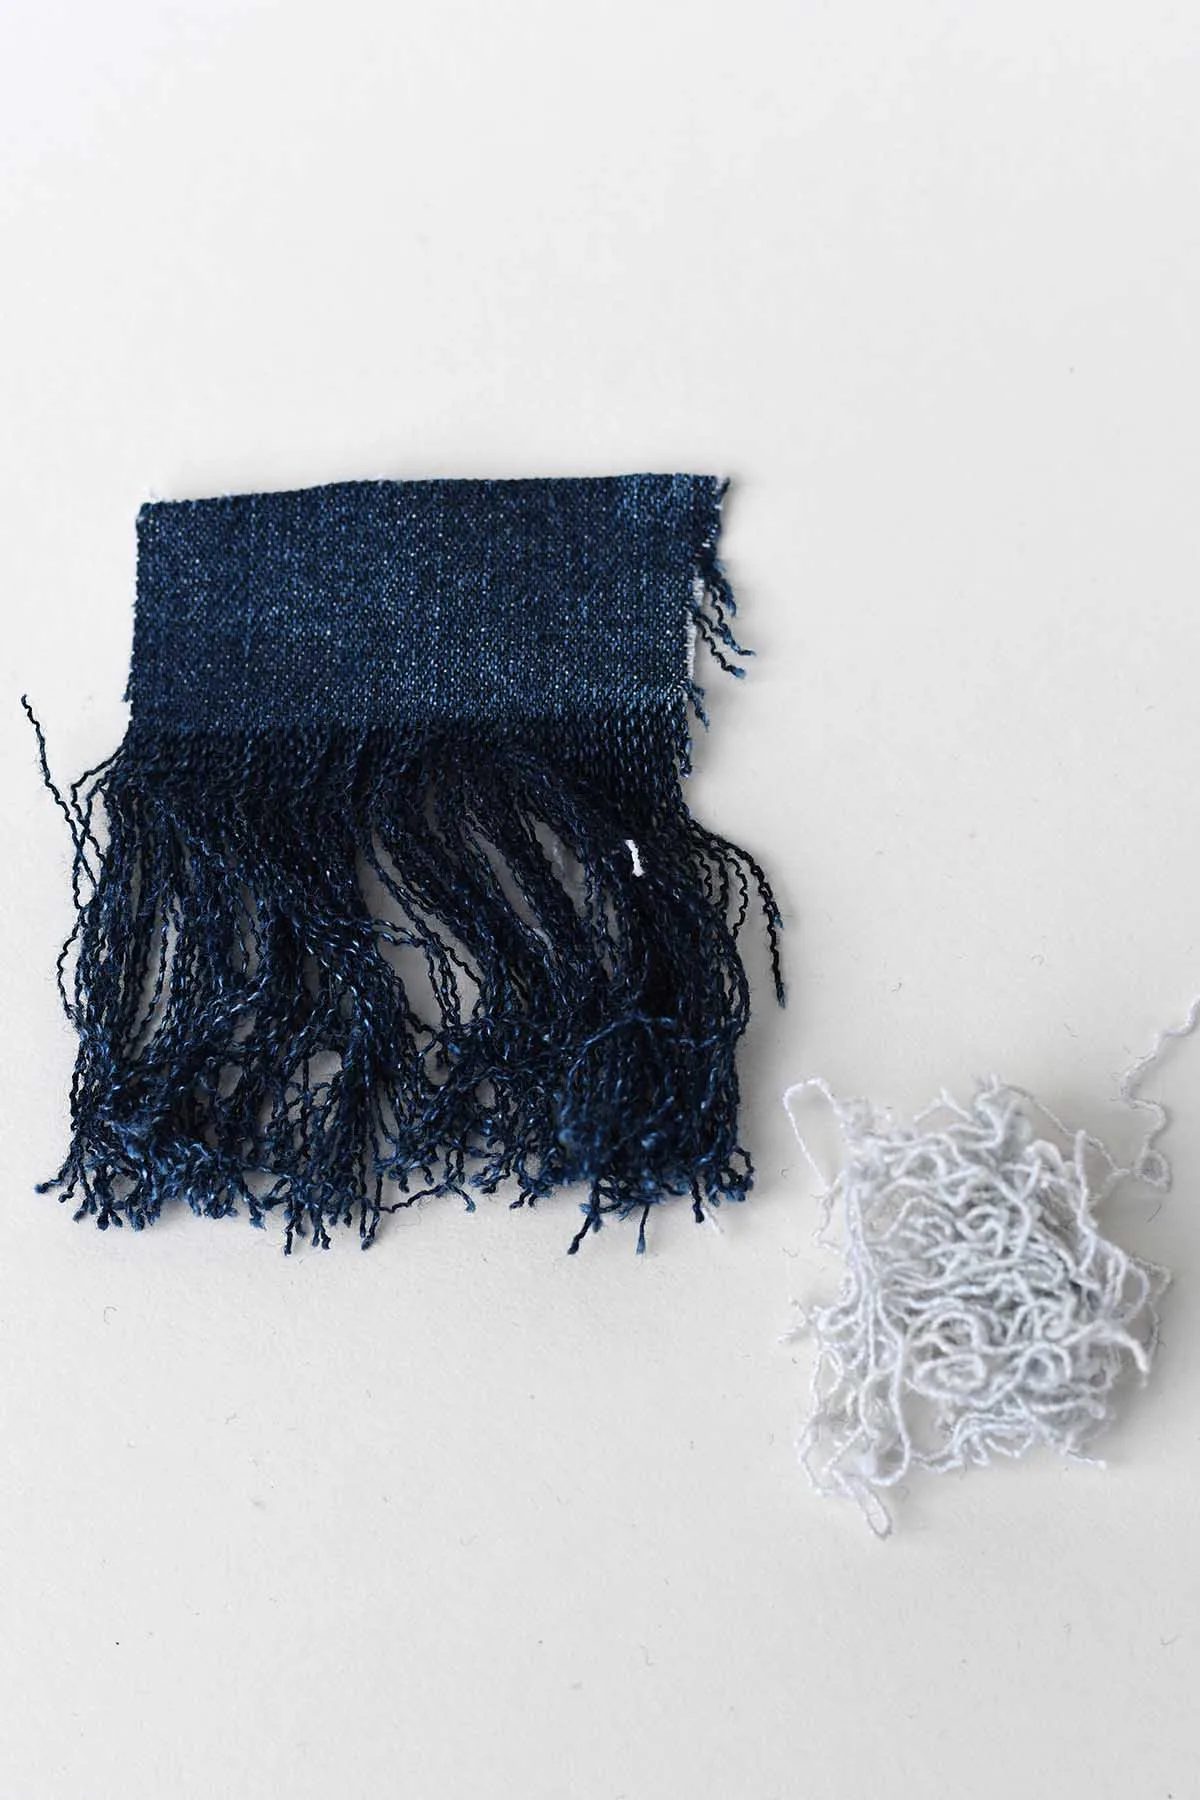 frayed scrap of denim and a pile of white threads that have been removed.